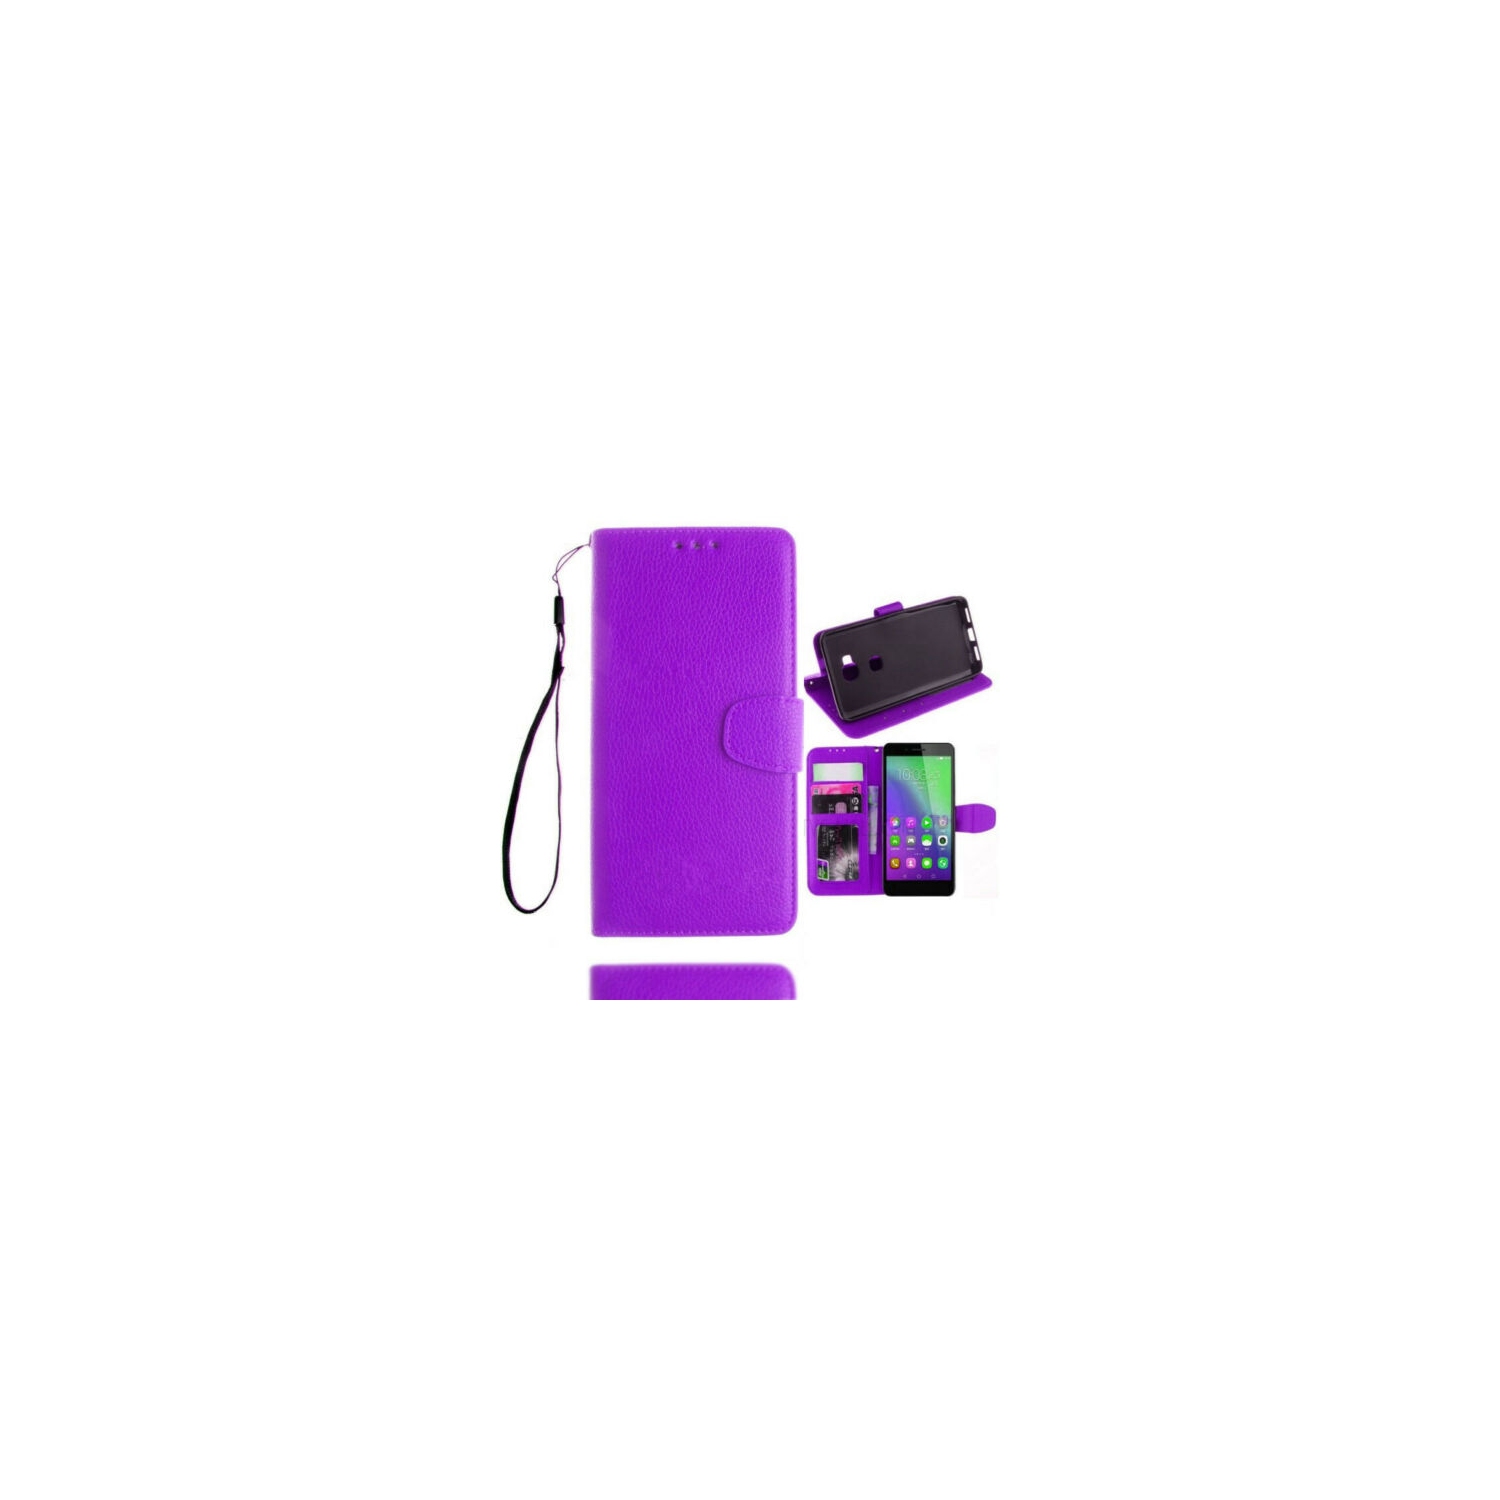 【CSmart】 Magnetic Card Slot Leather Folio Wallet Flip Case Cover for Huawei GR5 & Honor 5x, Purple